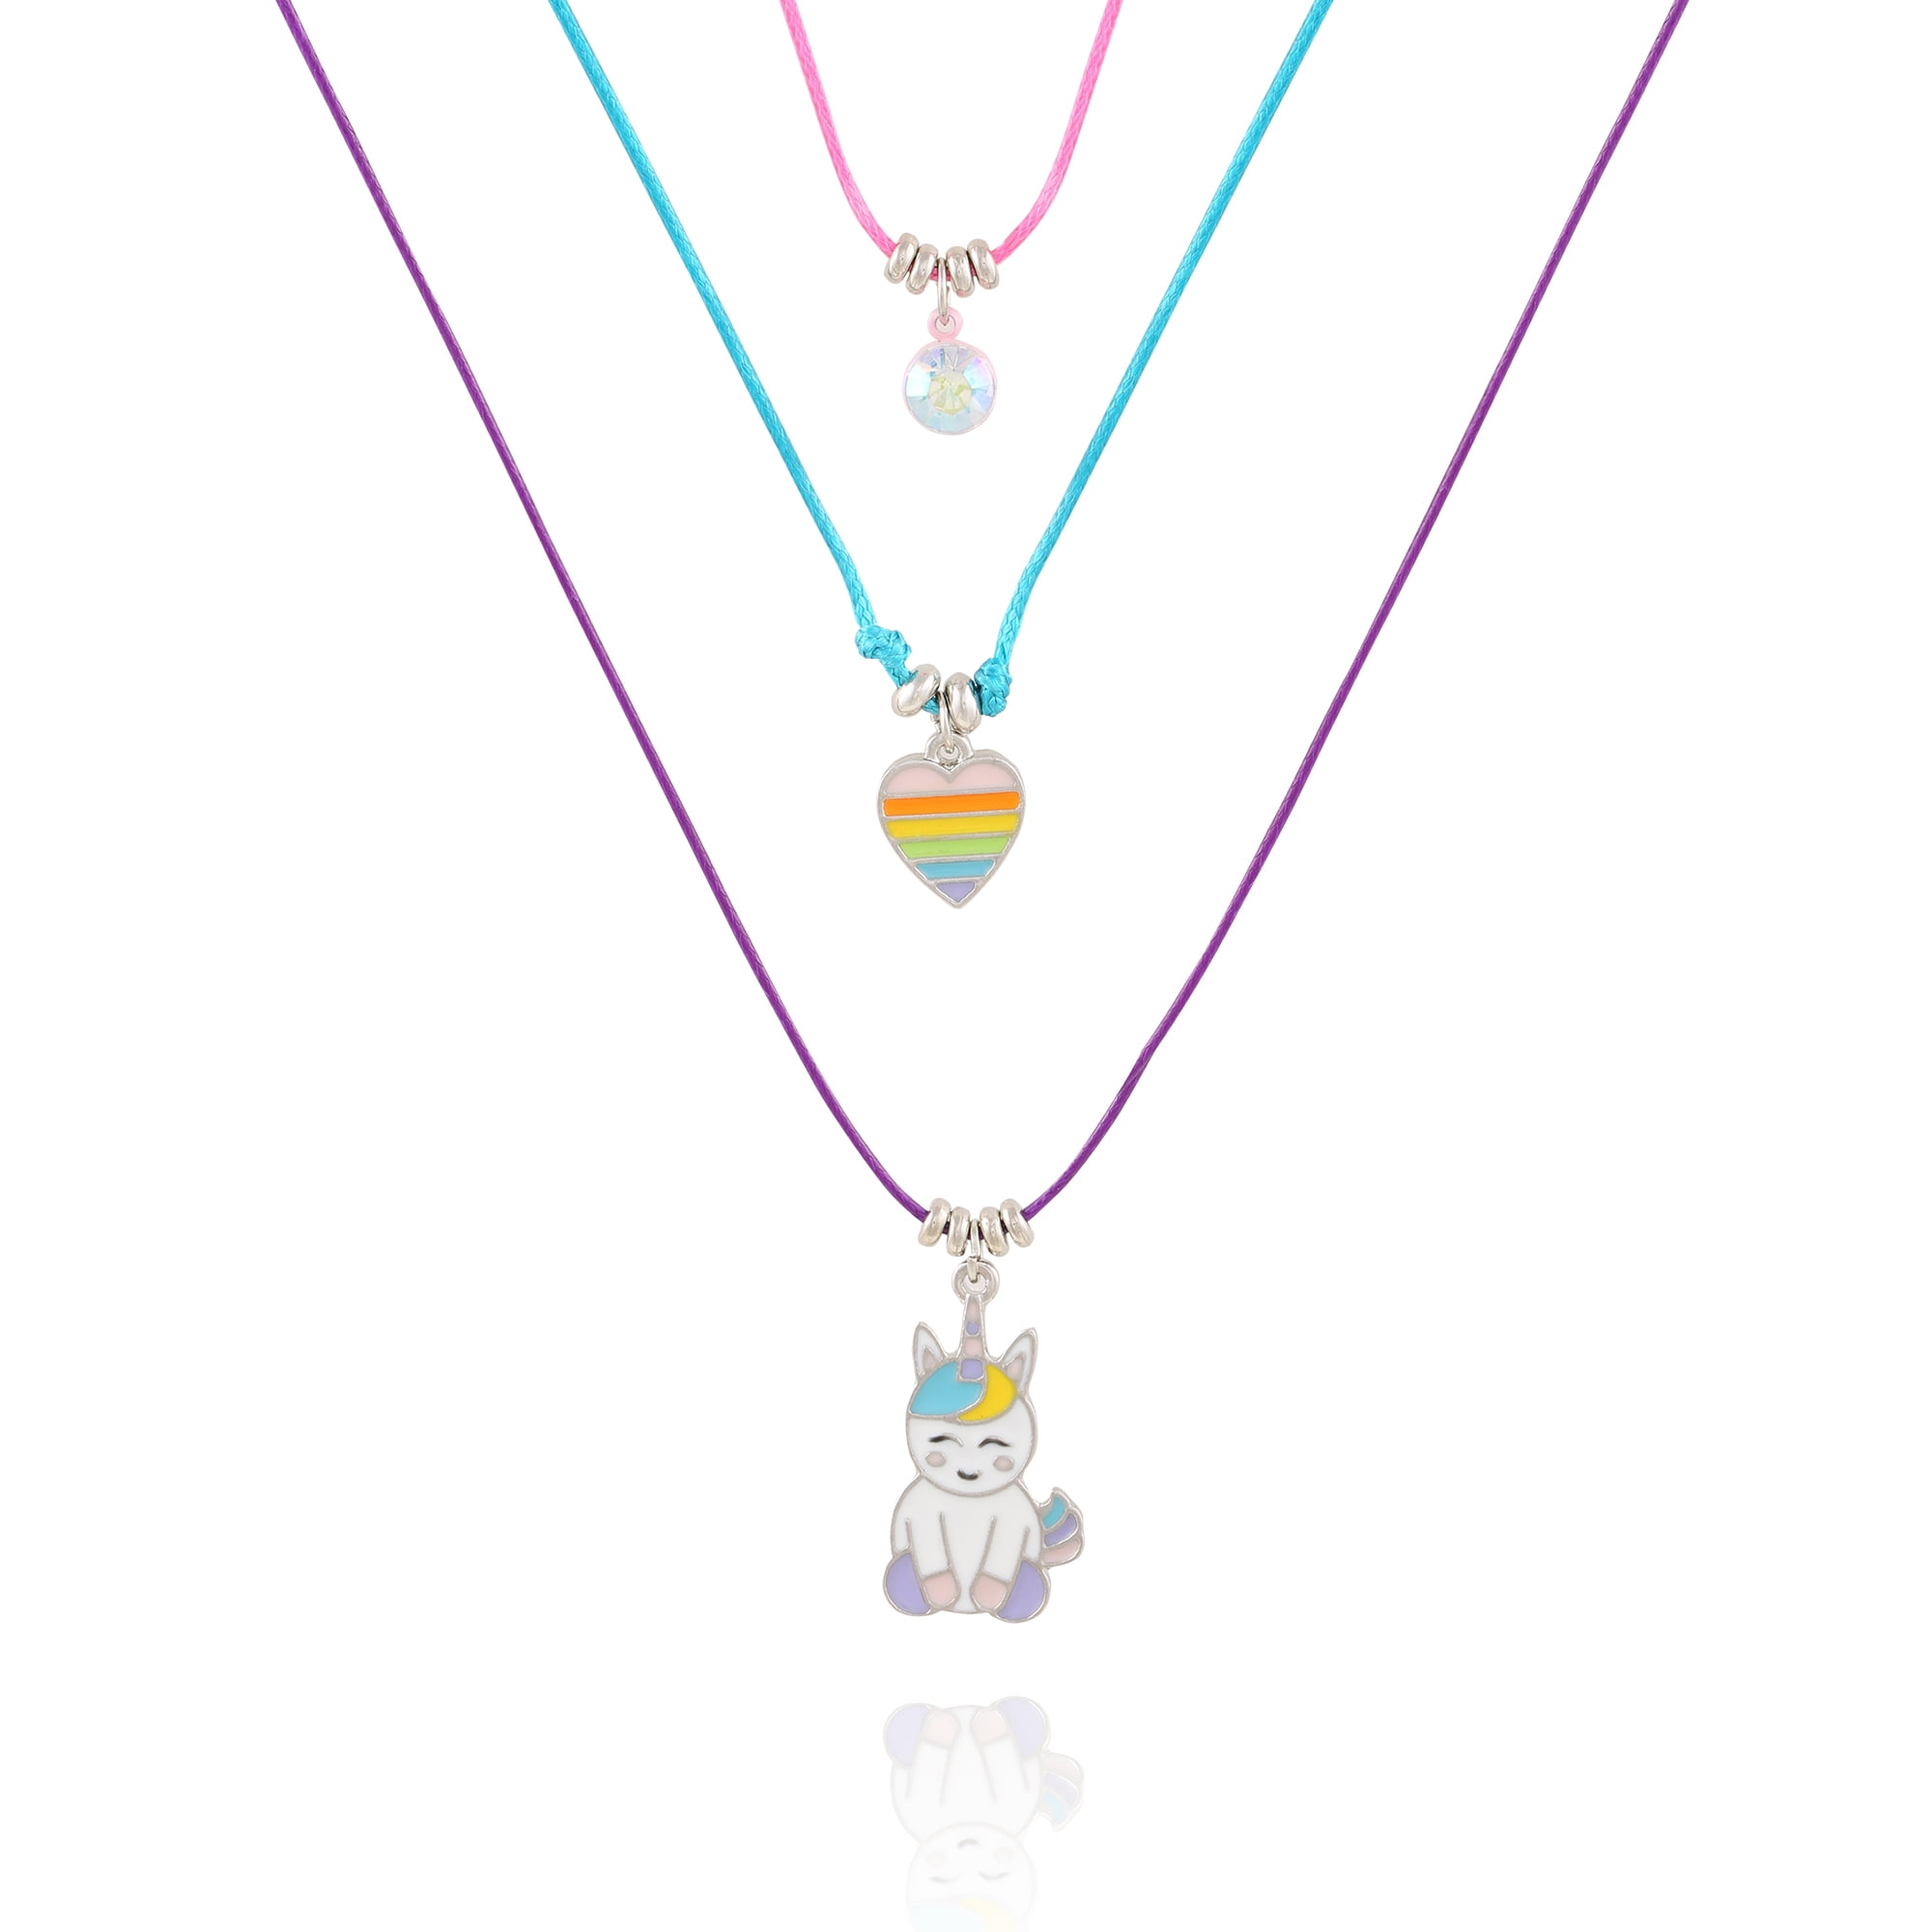 Wonder Nation Trio Bright Girls Unicorn Layered Necklace Set. Stone Charms on Bright 14", 15", and 15" Chords.